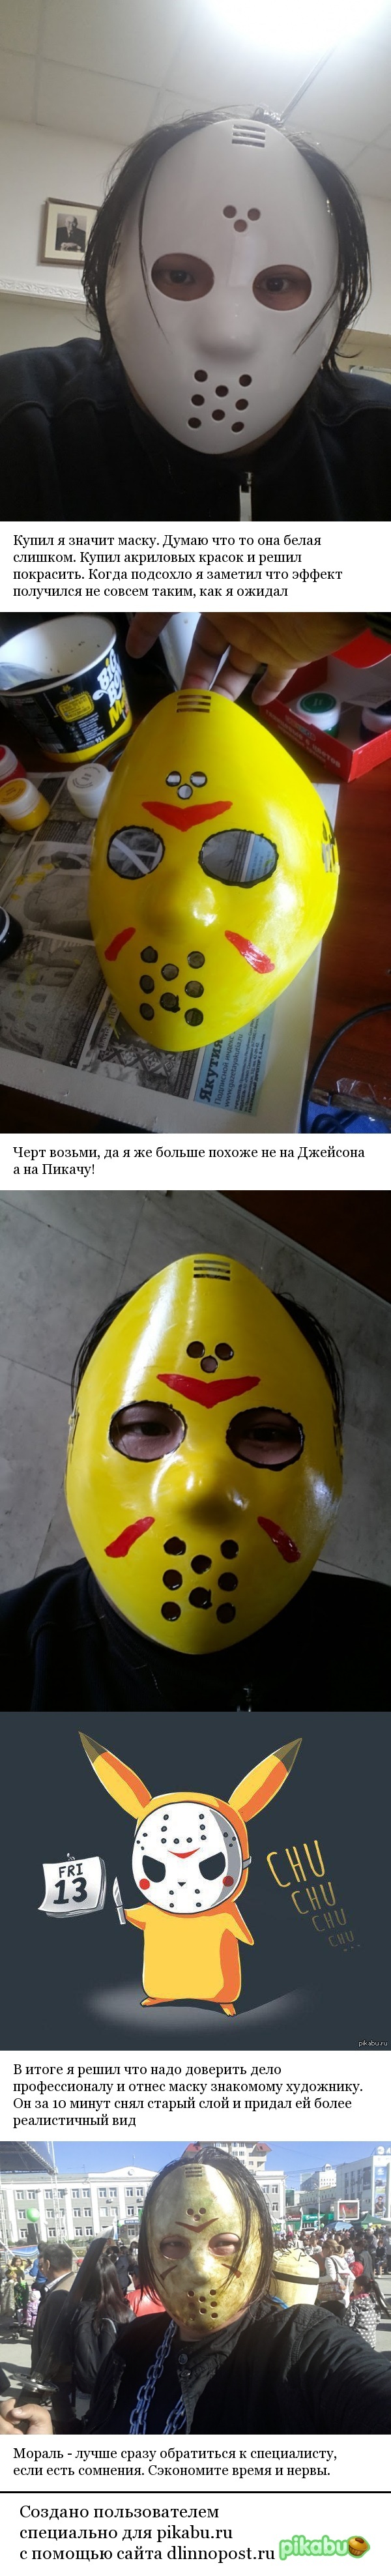 How I prepared the mask for the festival - My, Mask, Friday the 13th, Pikachu, Halloween, Longpost, Jason Voorhees